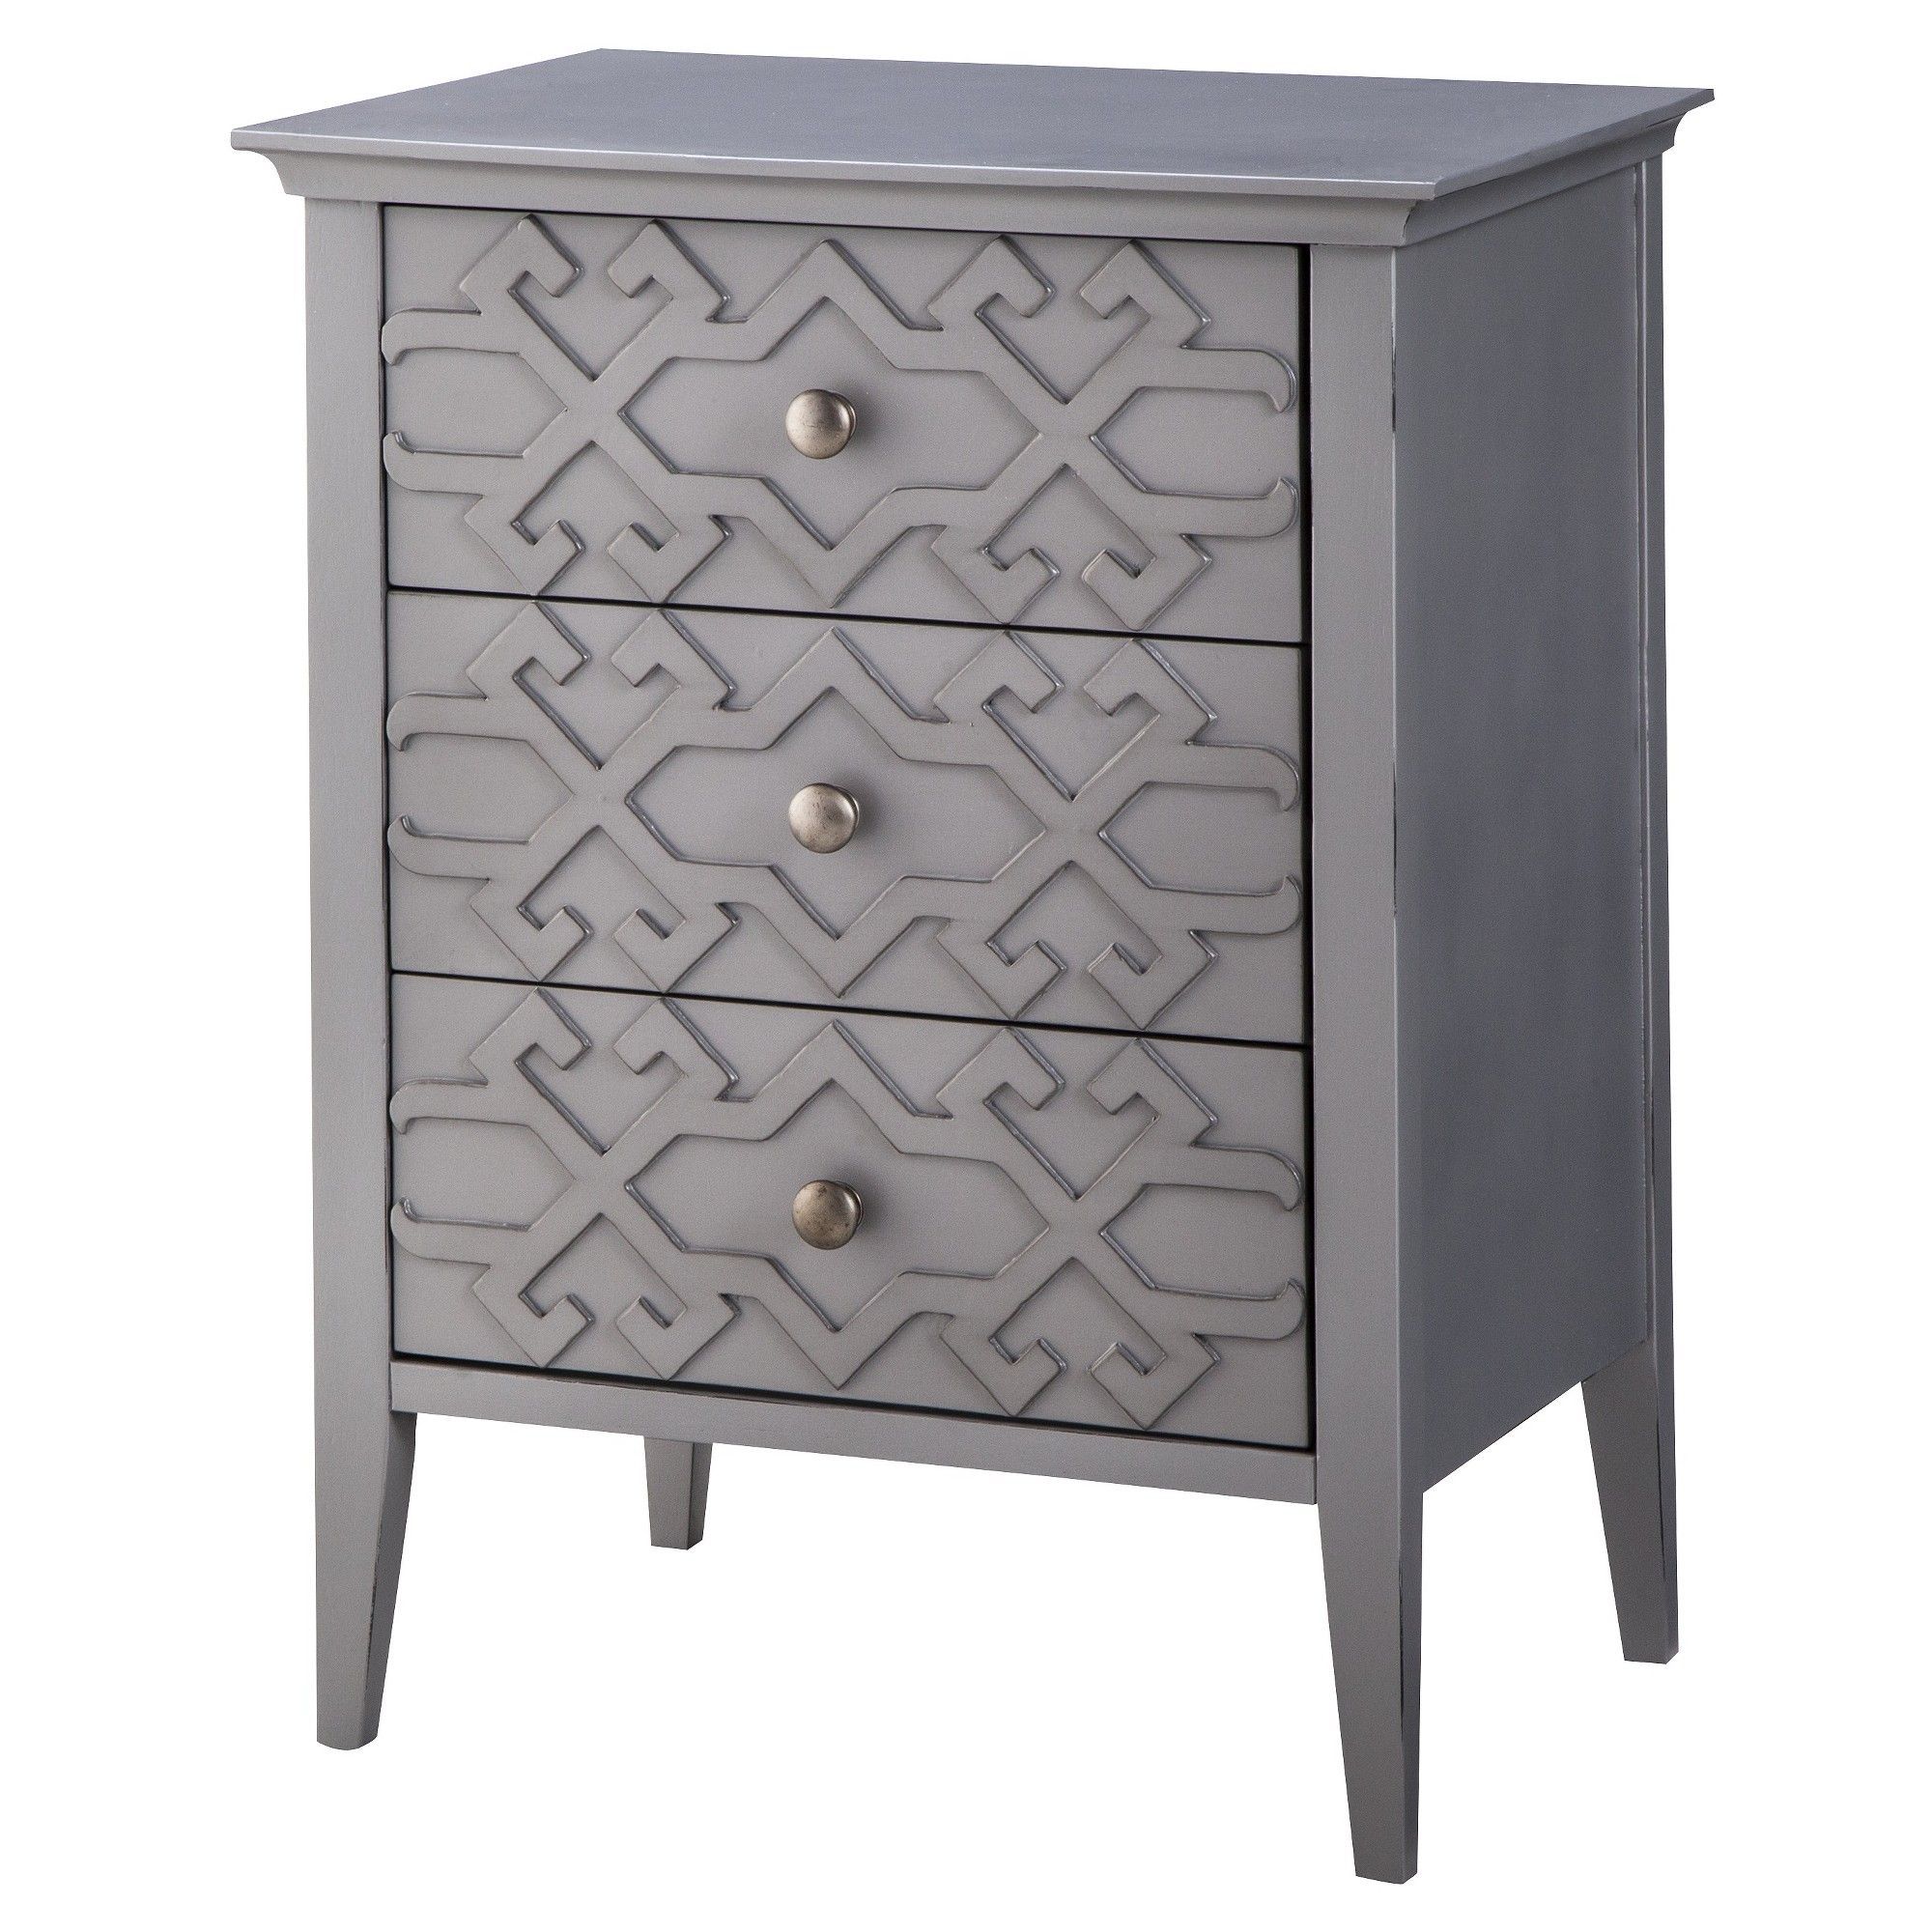 fretwork accent table threshold gray products foremost target prefinished solid hardwood flooring drum round gold glass coffee cottage long narrow end wesley allen beds small